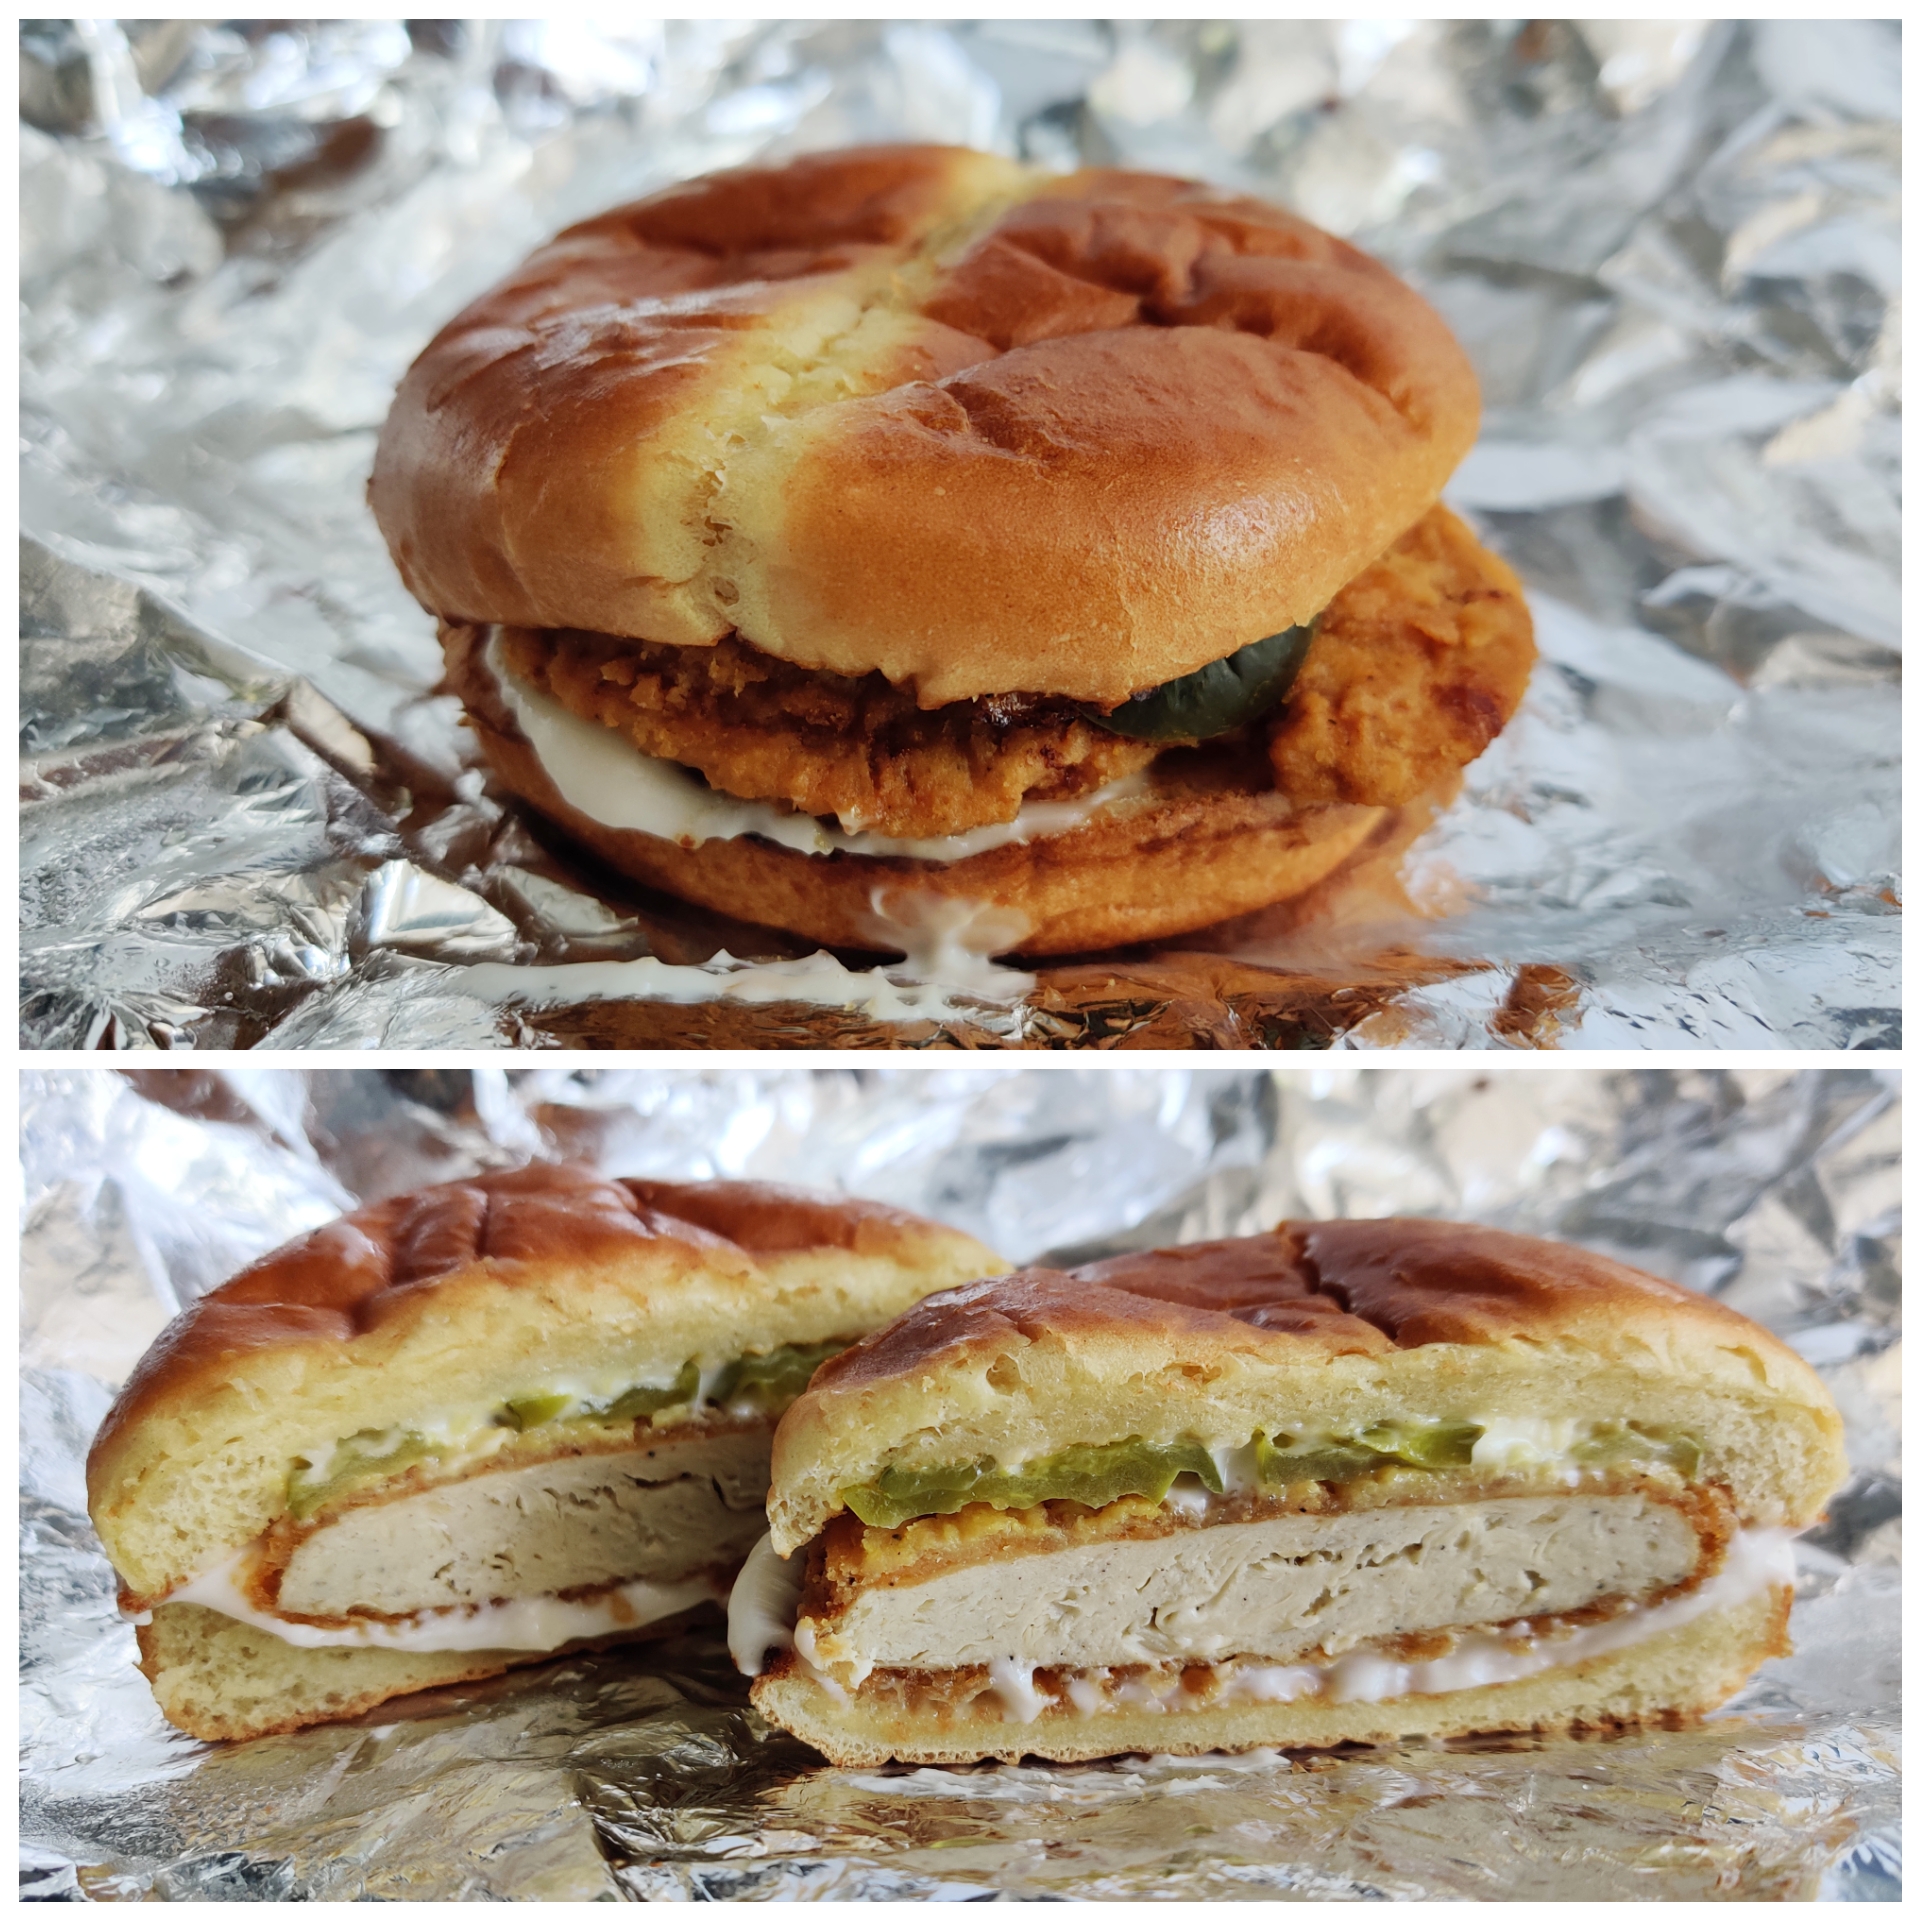 Plant based chicken sandwich from Pizza Pizza on a silver wrapper.